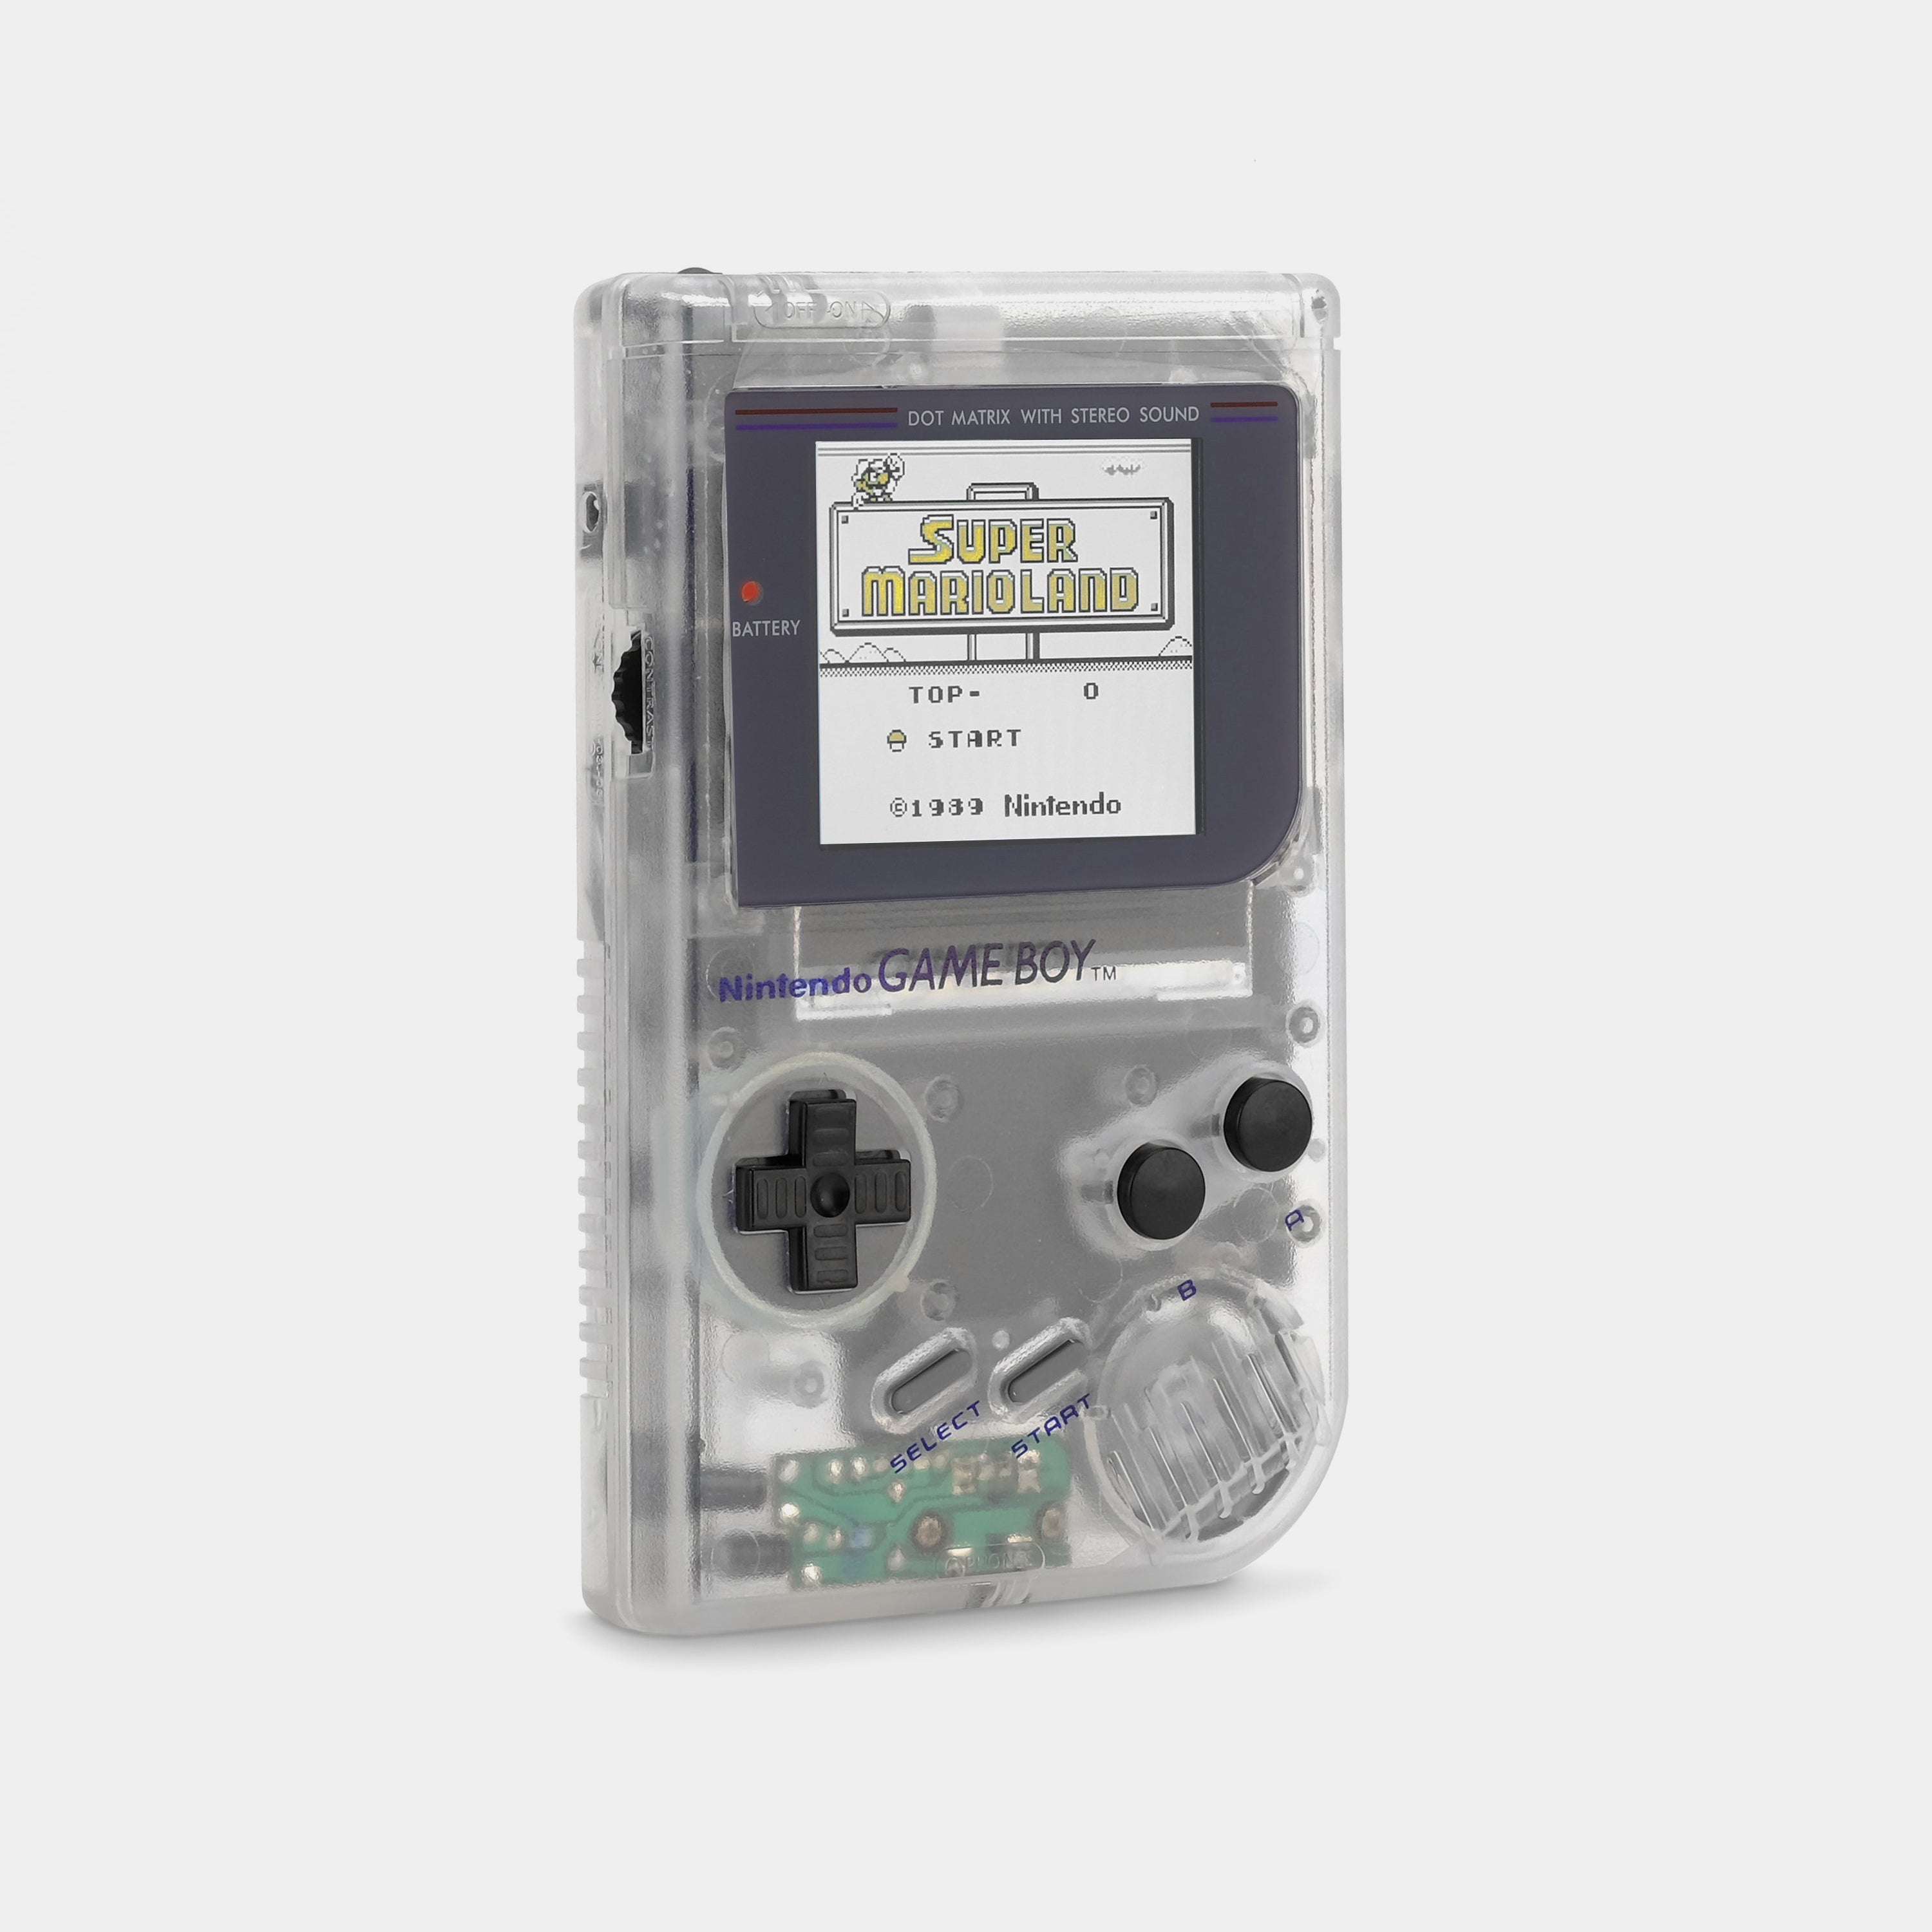 Nintendo Game Boy Clear Game Console With Multicolor Backlight